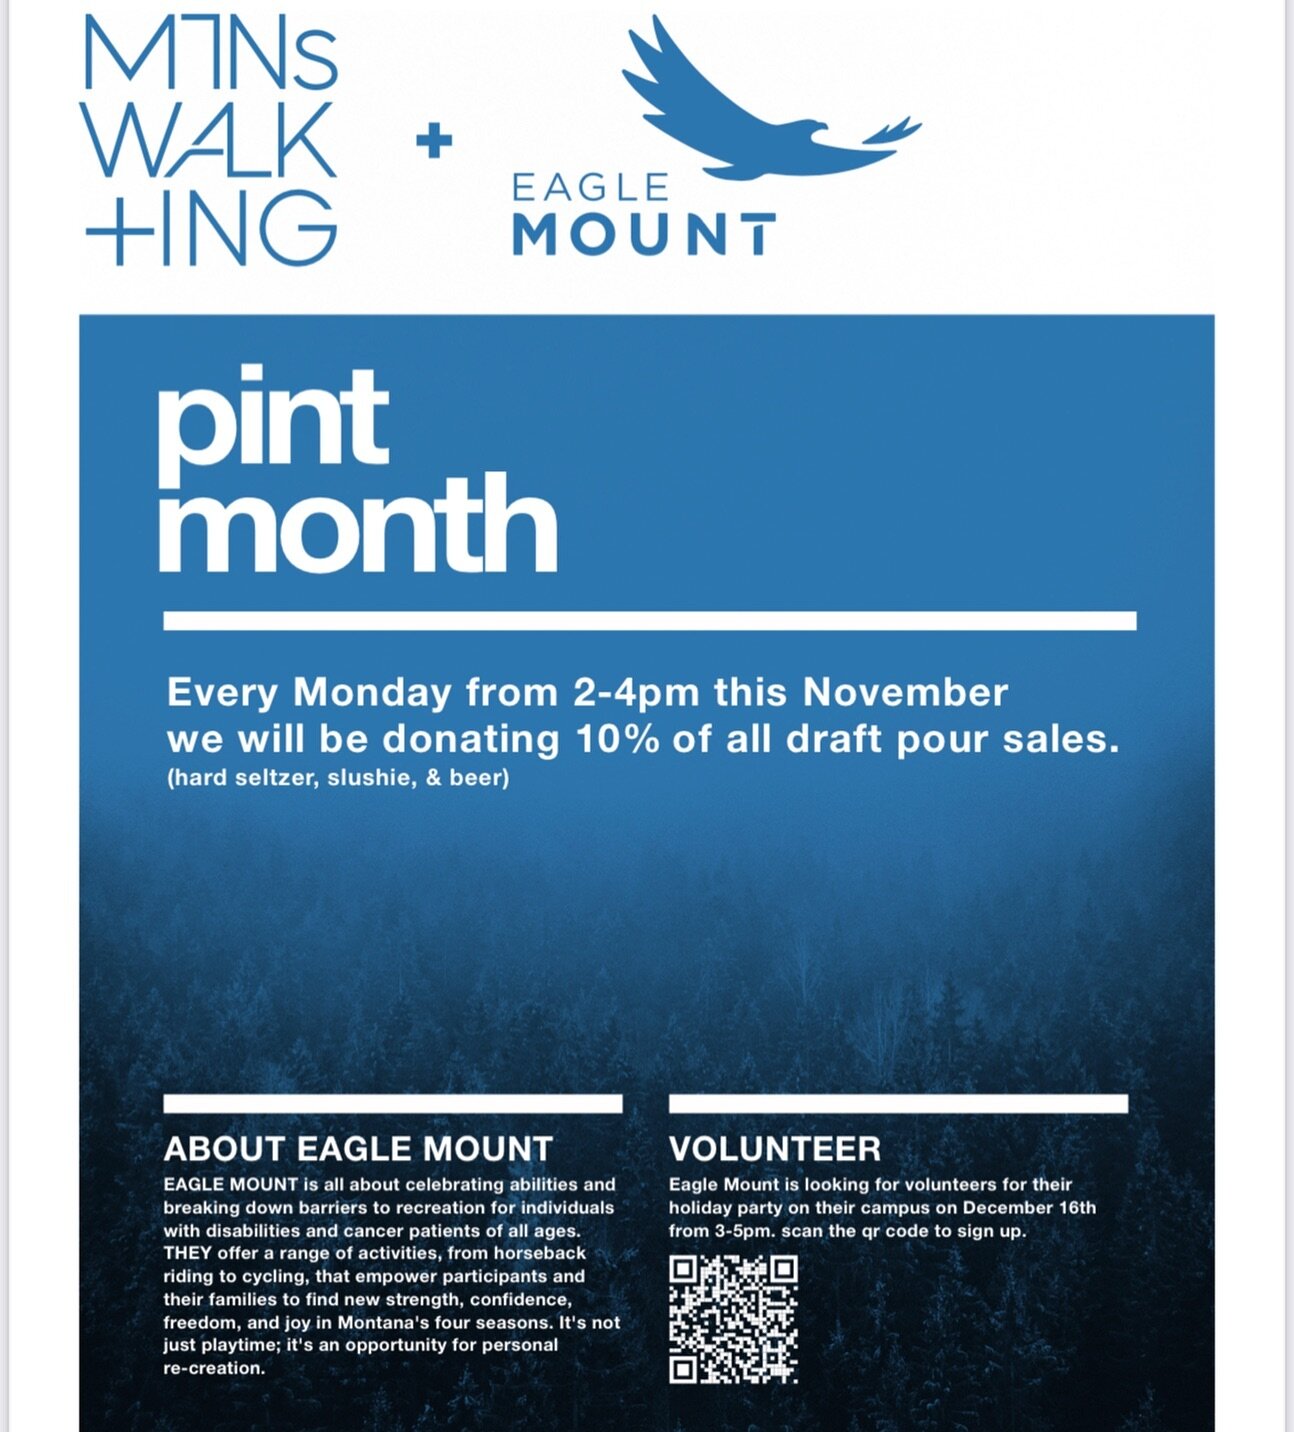 All month from 2-4pm on Mondays, please join us in supporting @eaglemountbozeman 

They are also very much in need of volunteers. Please sign up through the link on their page or scan the QR code on one of our posters around town/in the taproom. 

Pl